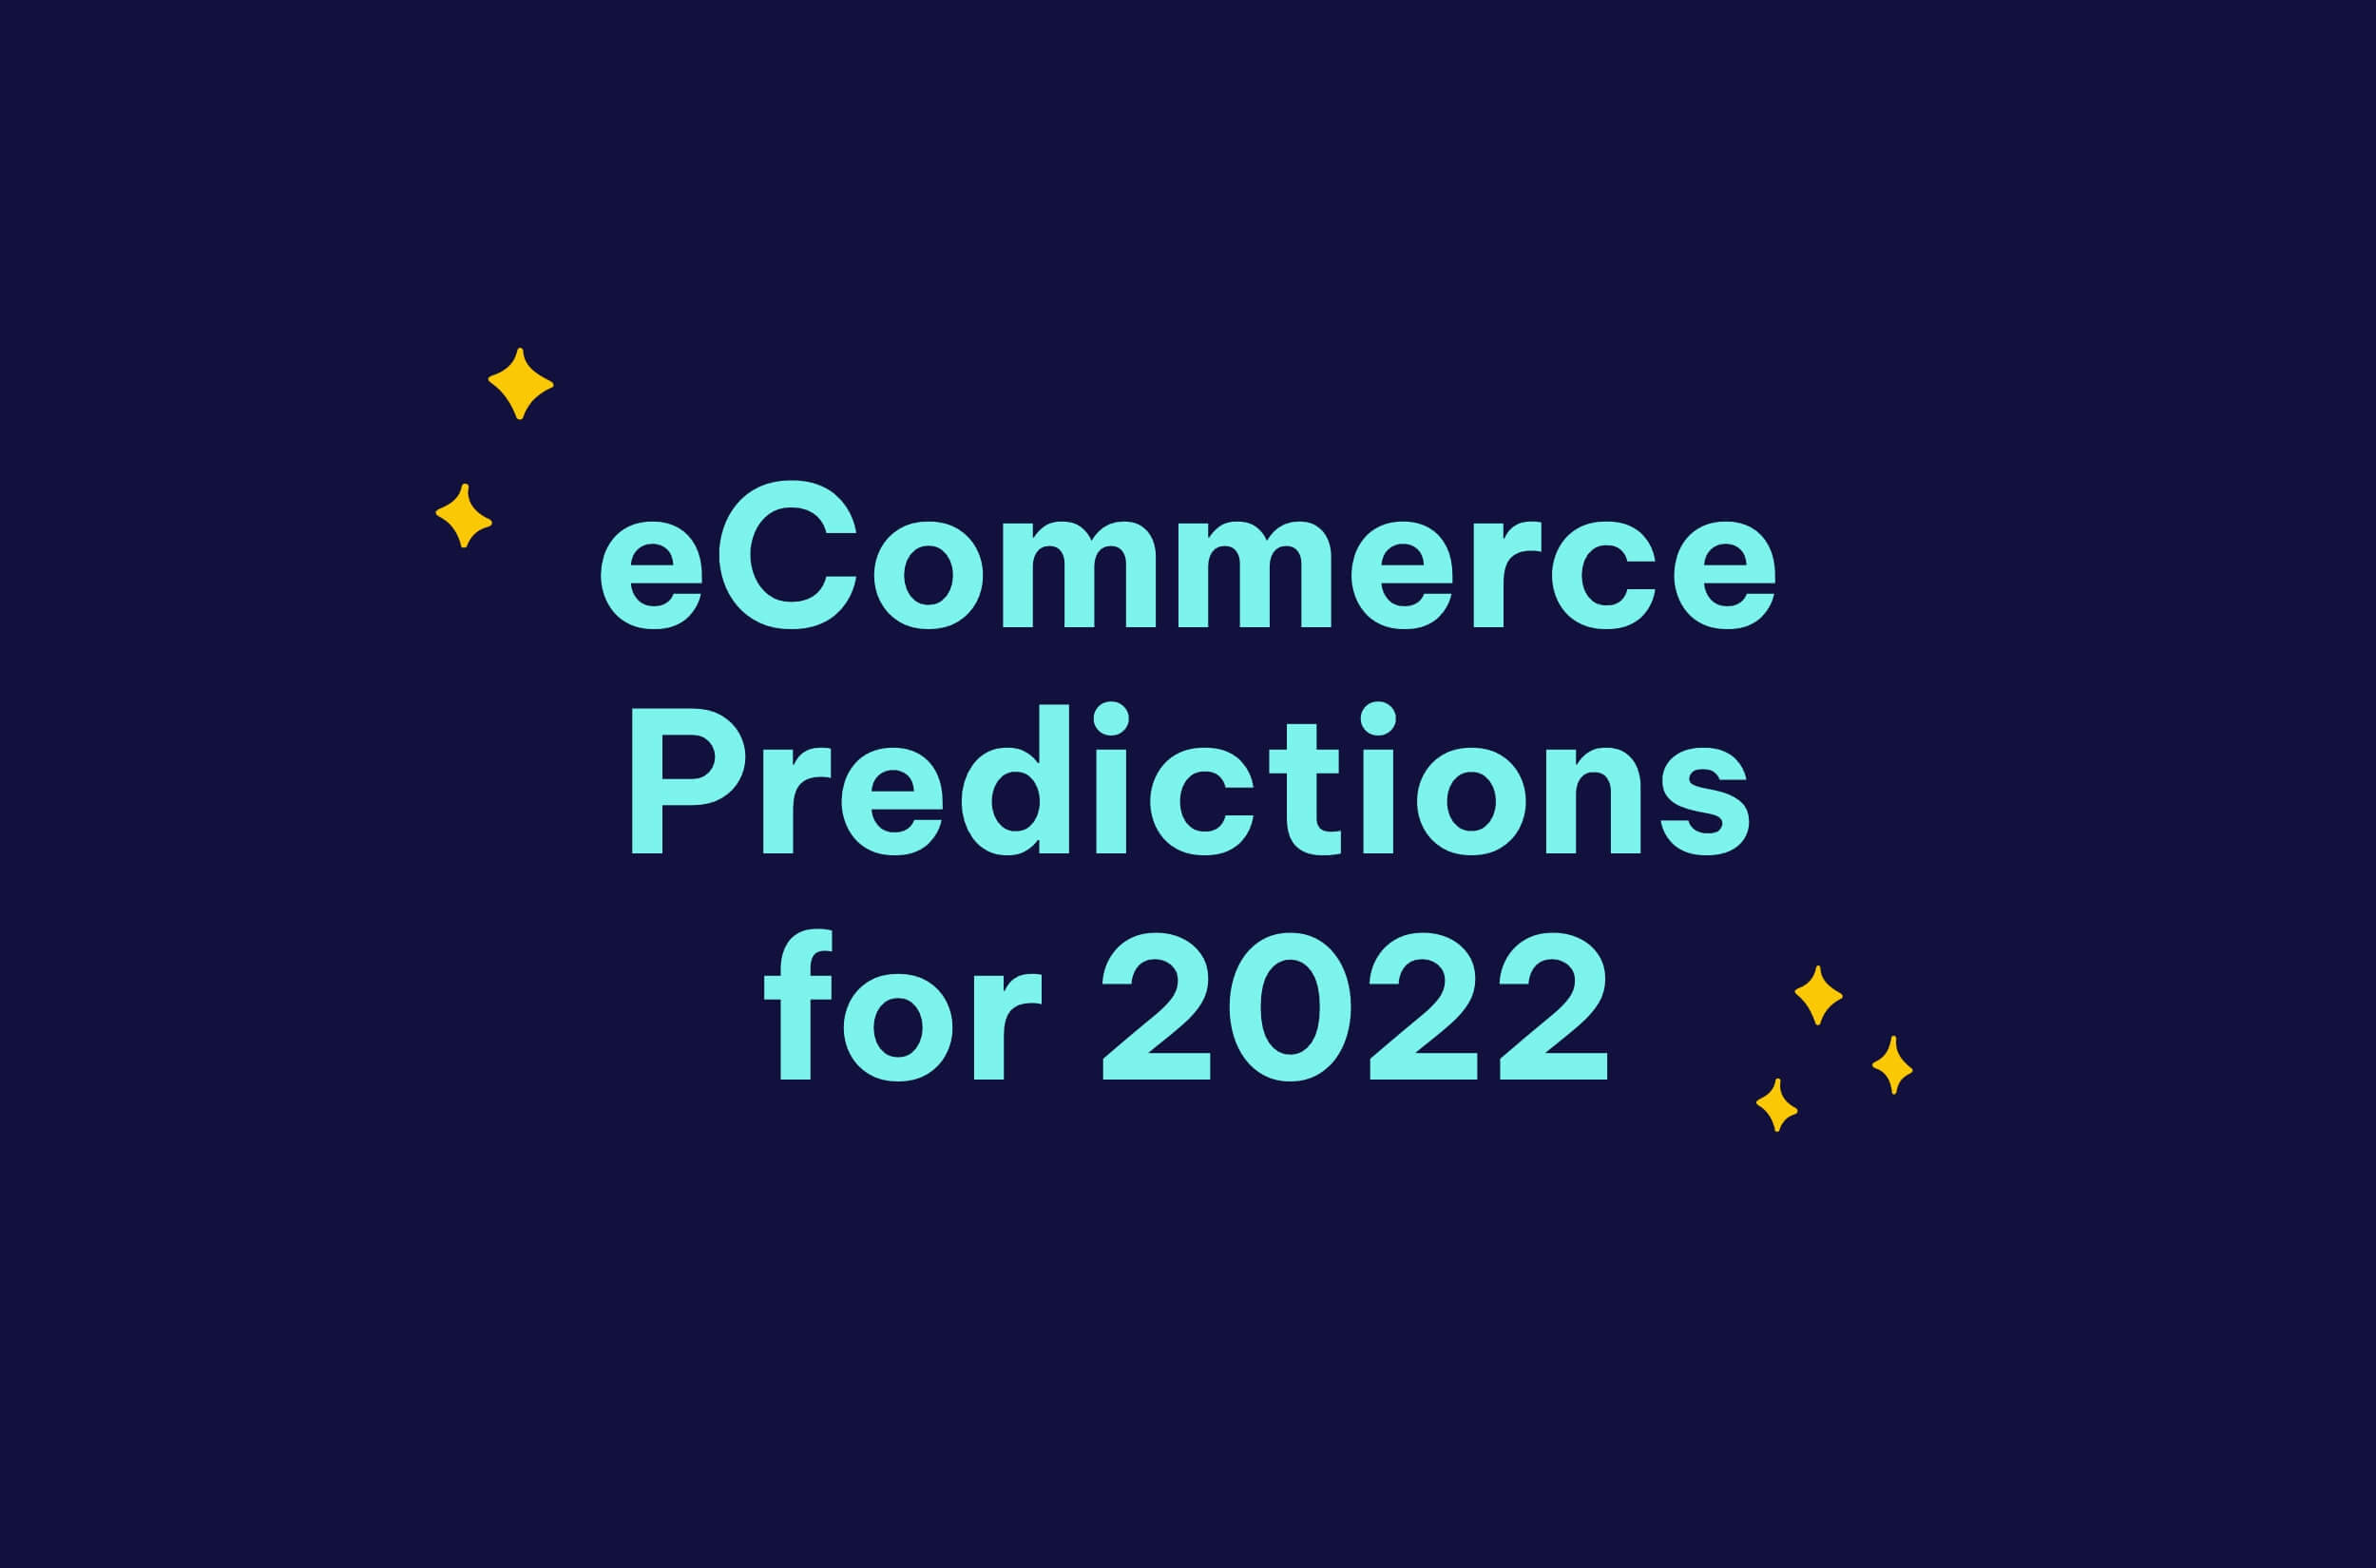 eCommerce Predictions for 2022: Omnichannel, inflation, data, brand value and costs dominate eCommerce 2022